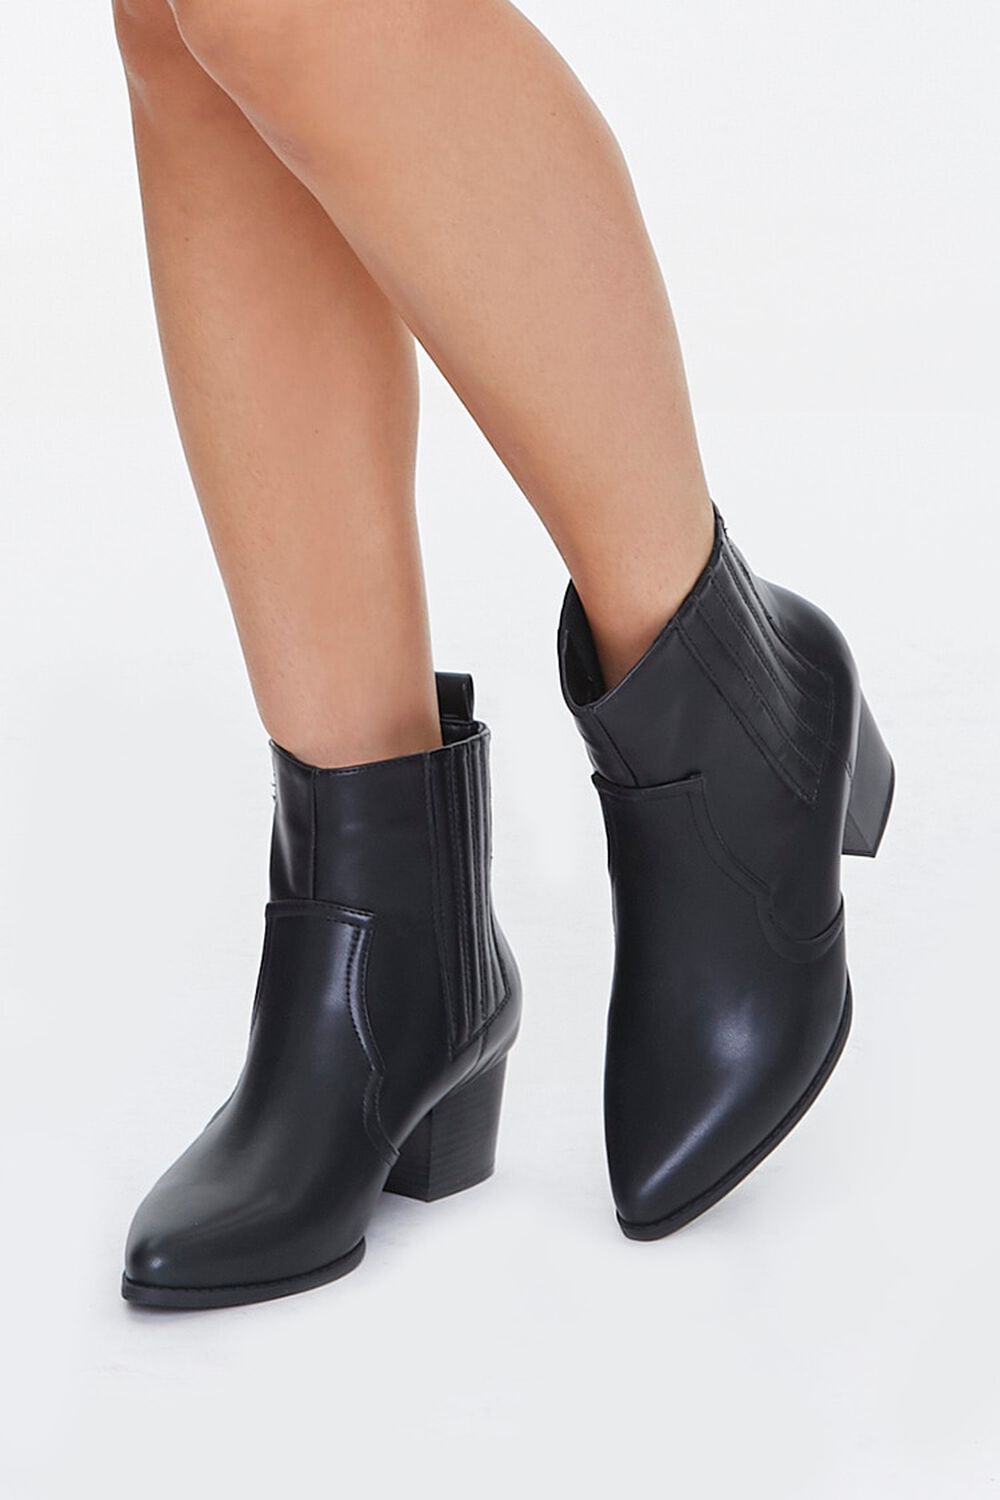 Faux Leather Pointed Toe Booties, image 1